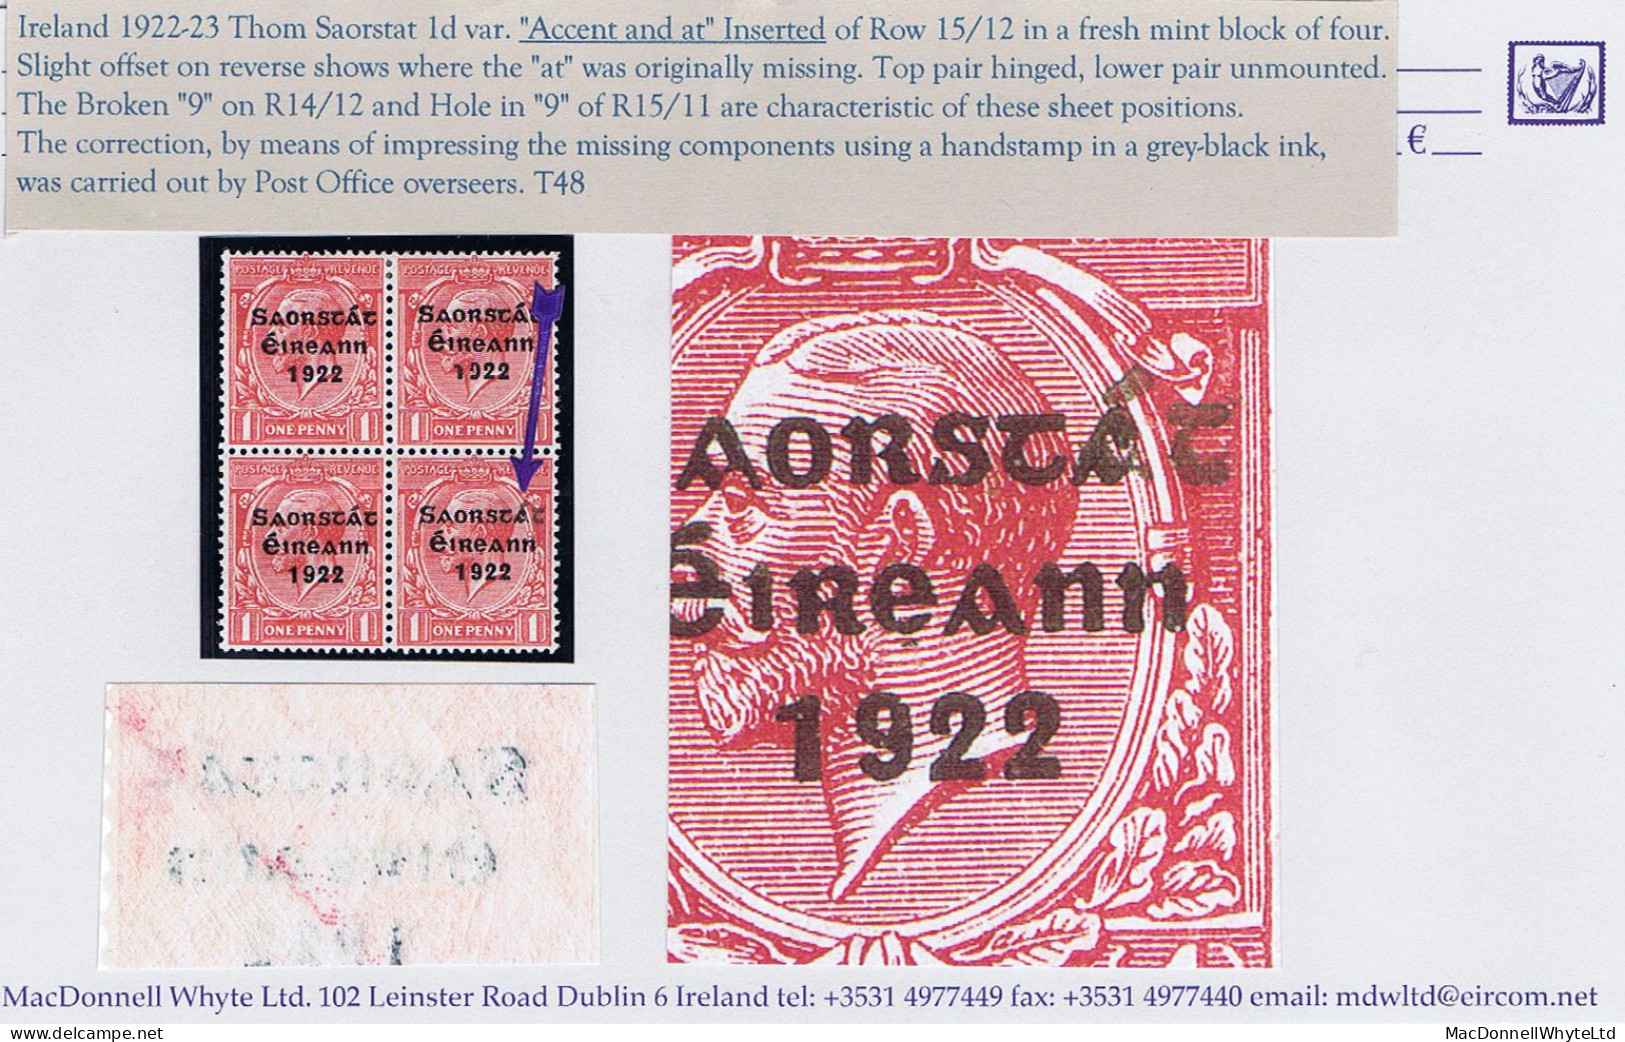 Ireland 1922-23 Thom Saorstat 1d Variety "Accent And At Inserted By Hand" R15/12 In A Block Of 4 Mint - Neufs